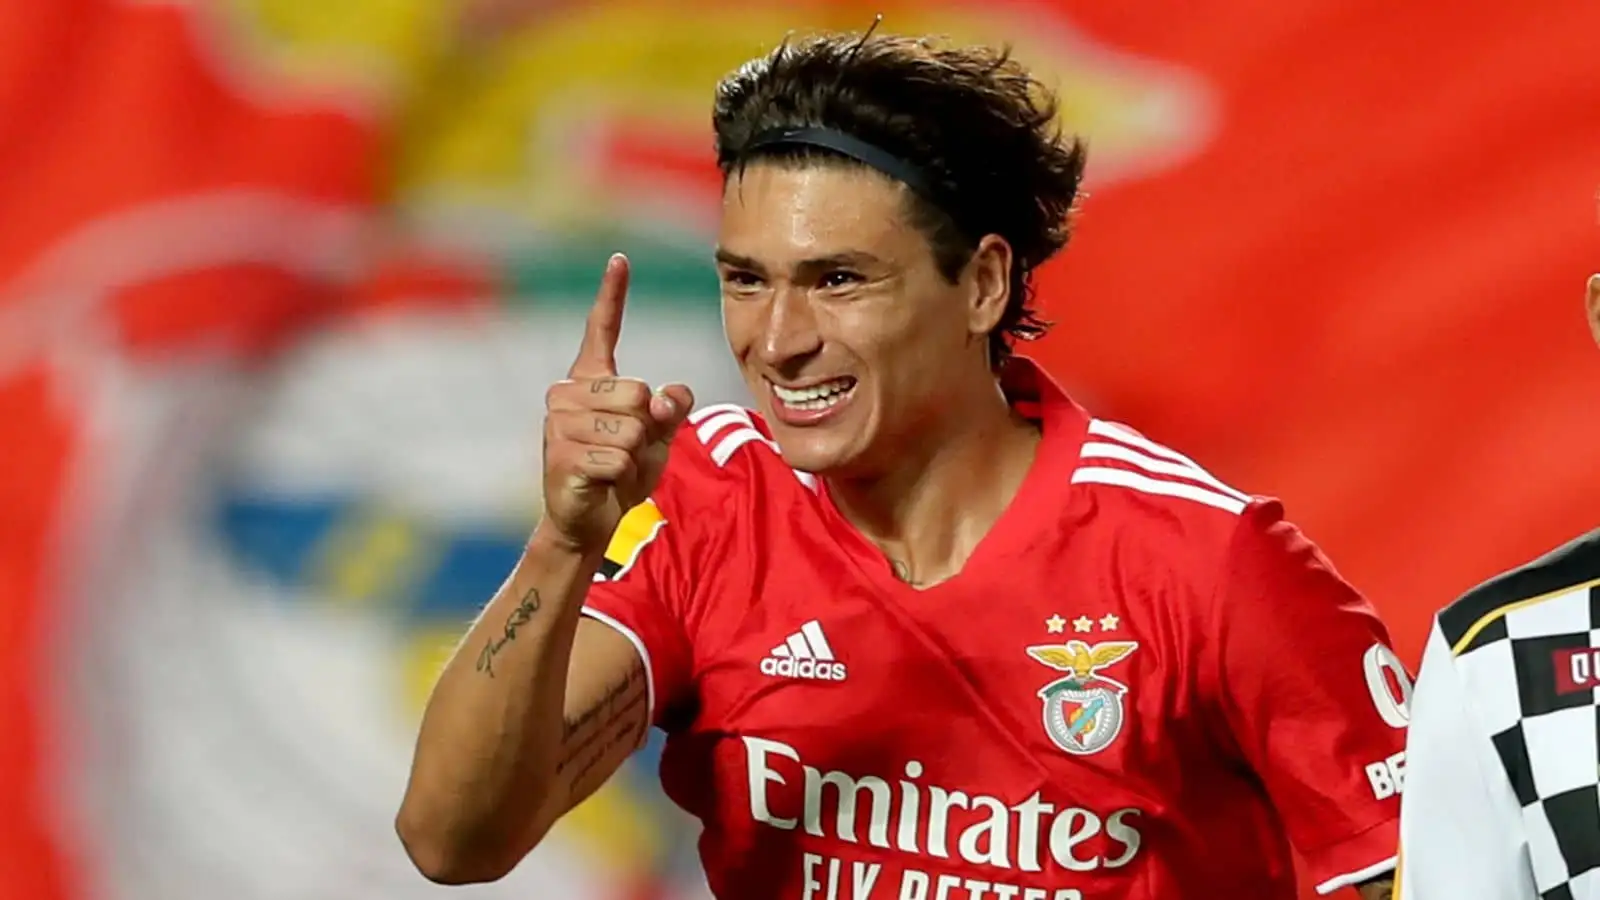 Darwin Nunez, Benfica striker celebrates after scoring his second goal during the Portuguese League football match between SL Benfica and Boavista FC at the Luz stadium in Lisbon. Striker wanted by Newcastle United